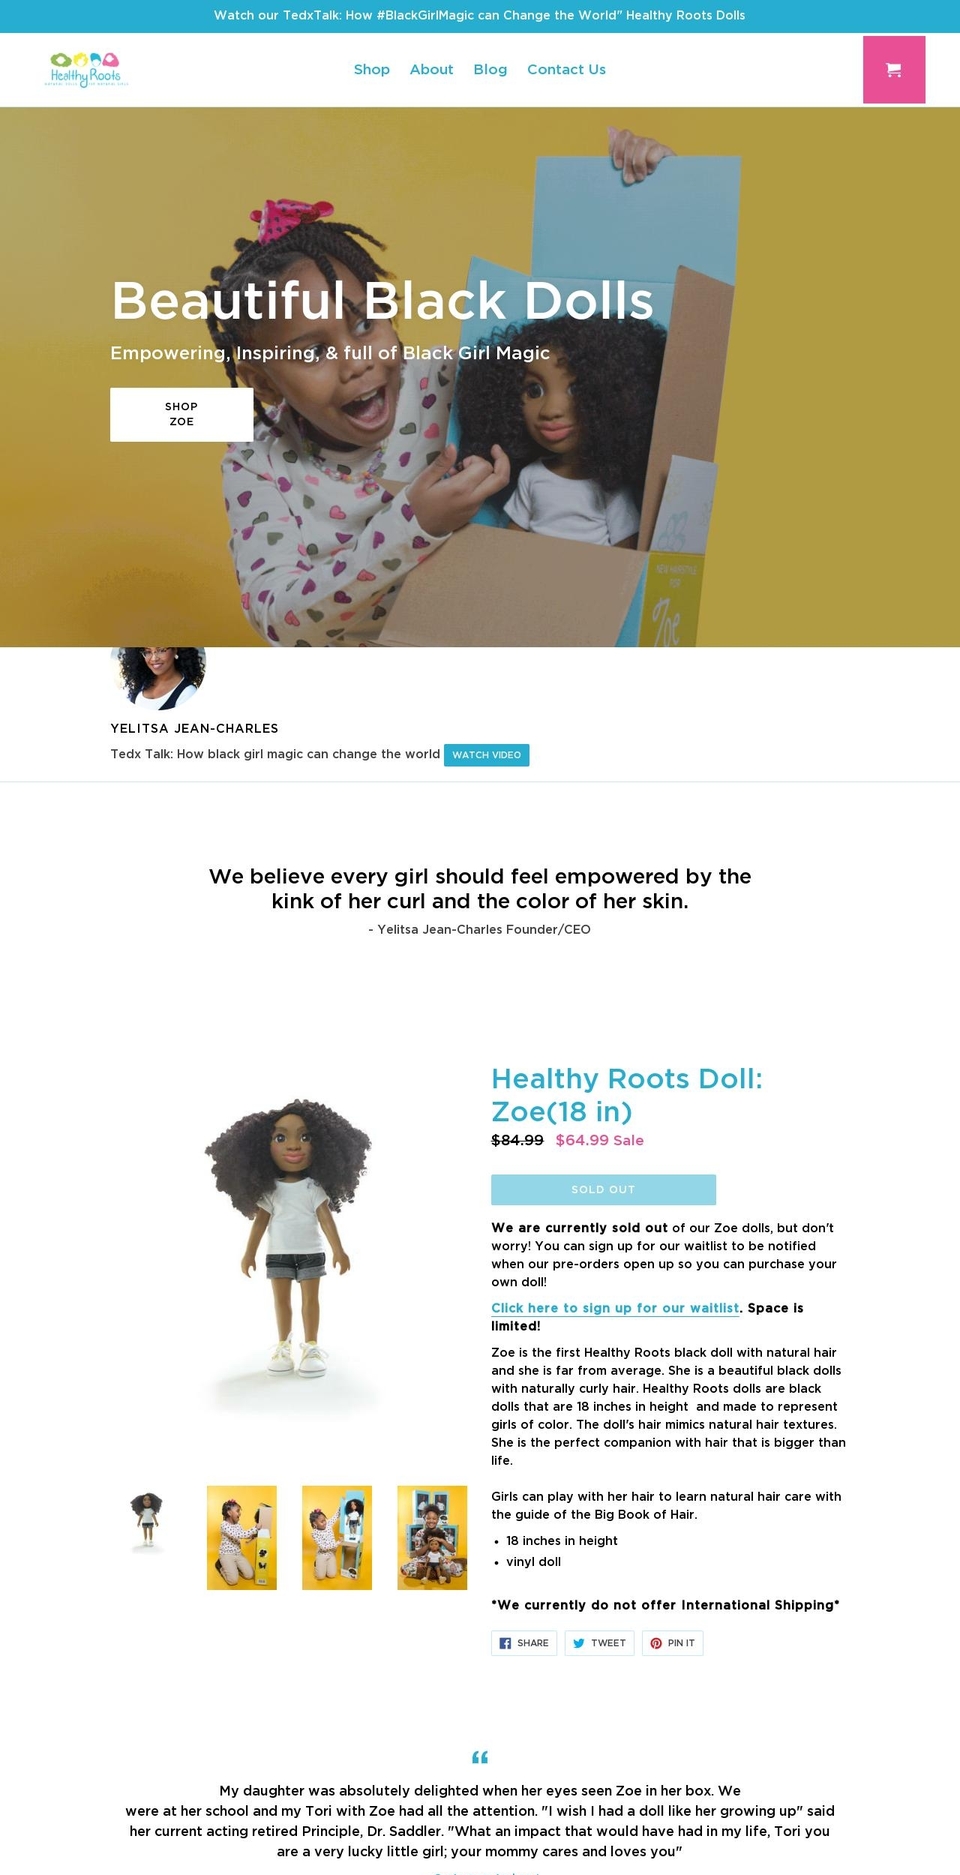 WATCHES Shopify theme site example healthyrootsdolls.com